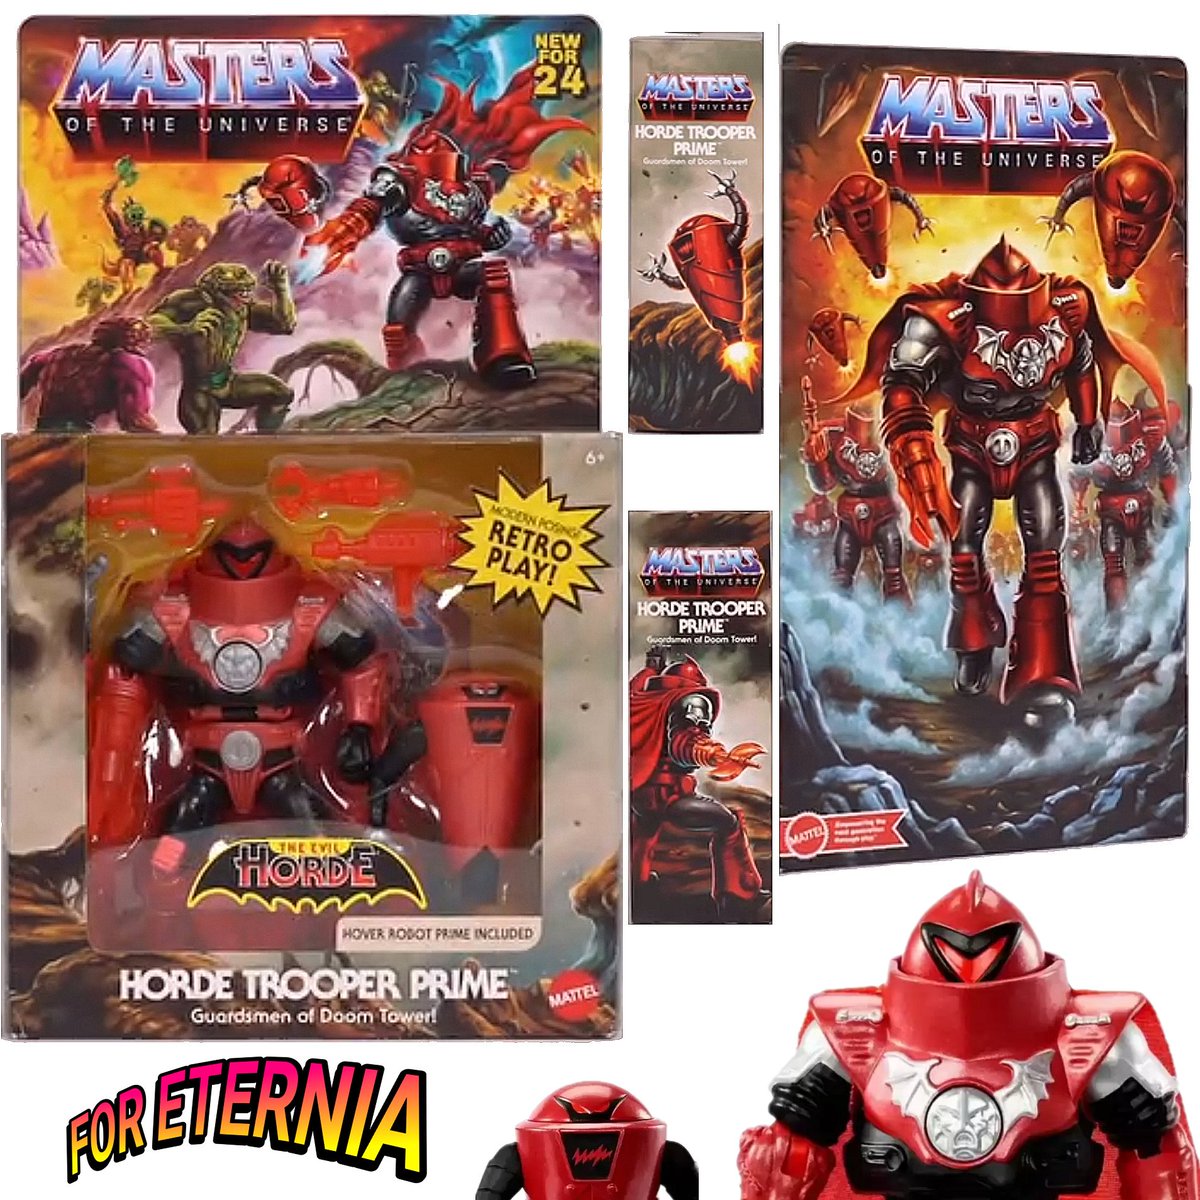 A look at the packaging & artwork for the upcoming Masters of the Universe: Origins HORDE TROOPER PRIME figure with artwork by Francisco Etchart 🎨 and courtesy of packaging designer Roy Juarez. (Reportedly a Walmart Exclusive). #MastersoftheUniverse #Motu #MotuOrigins